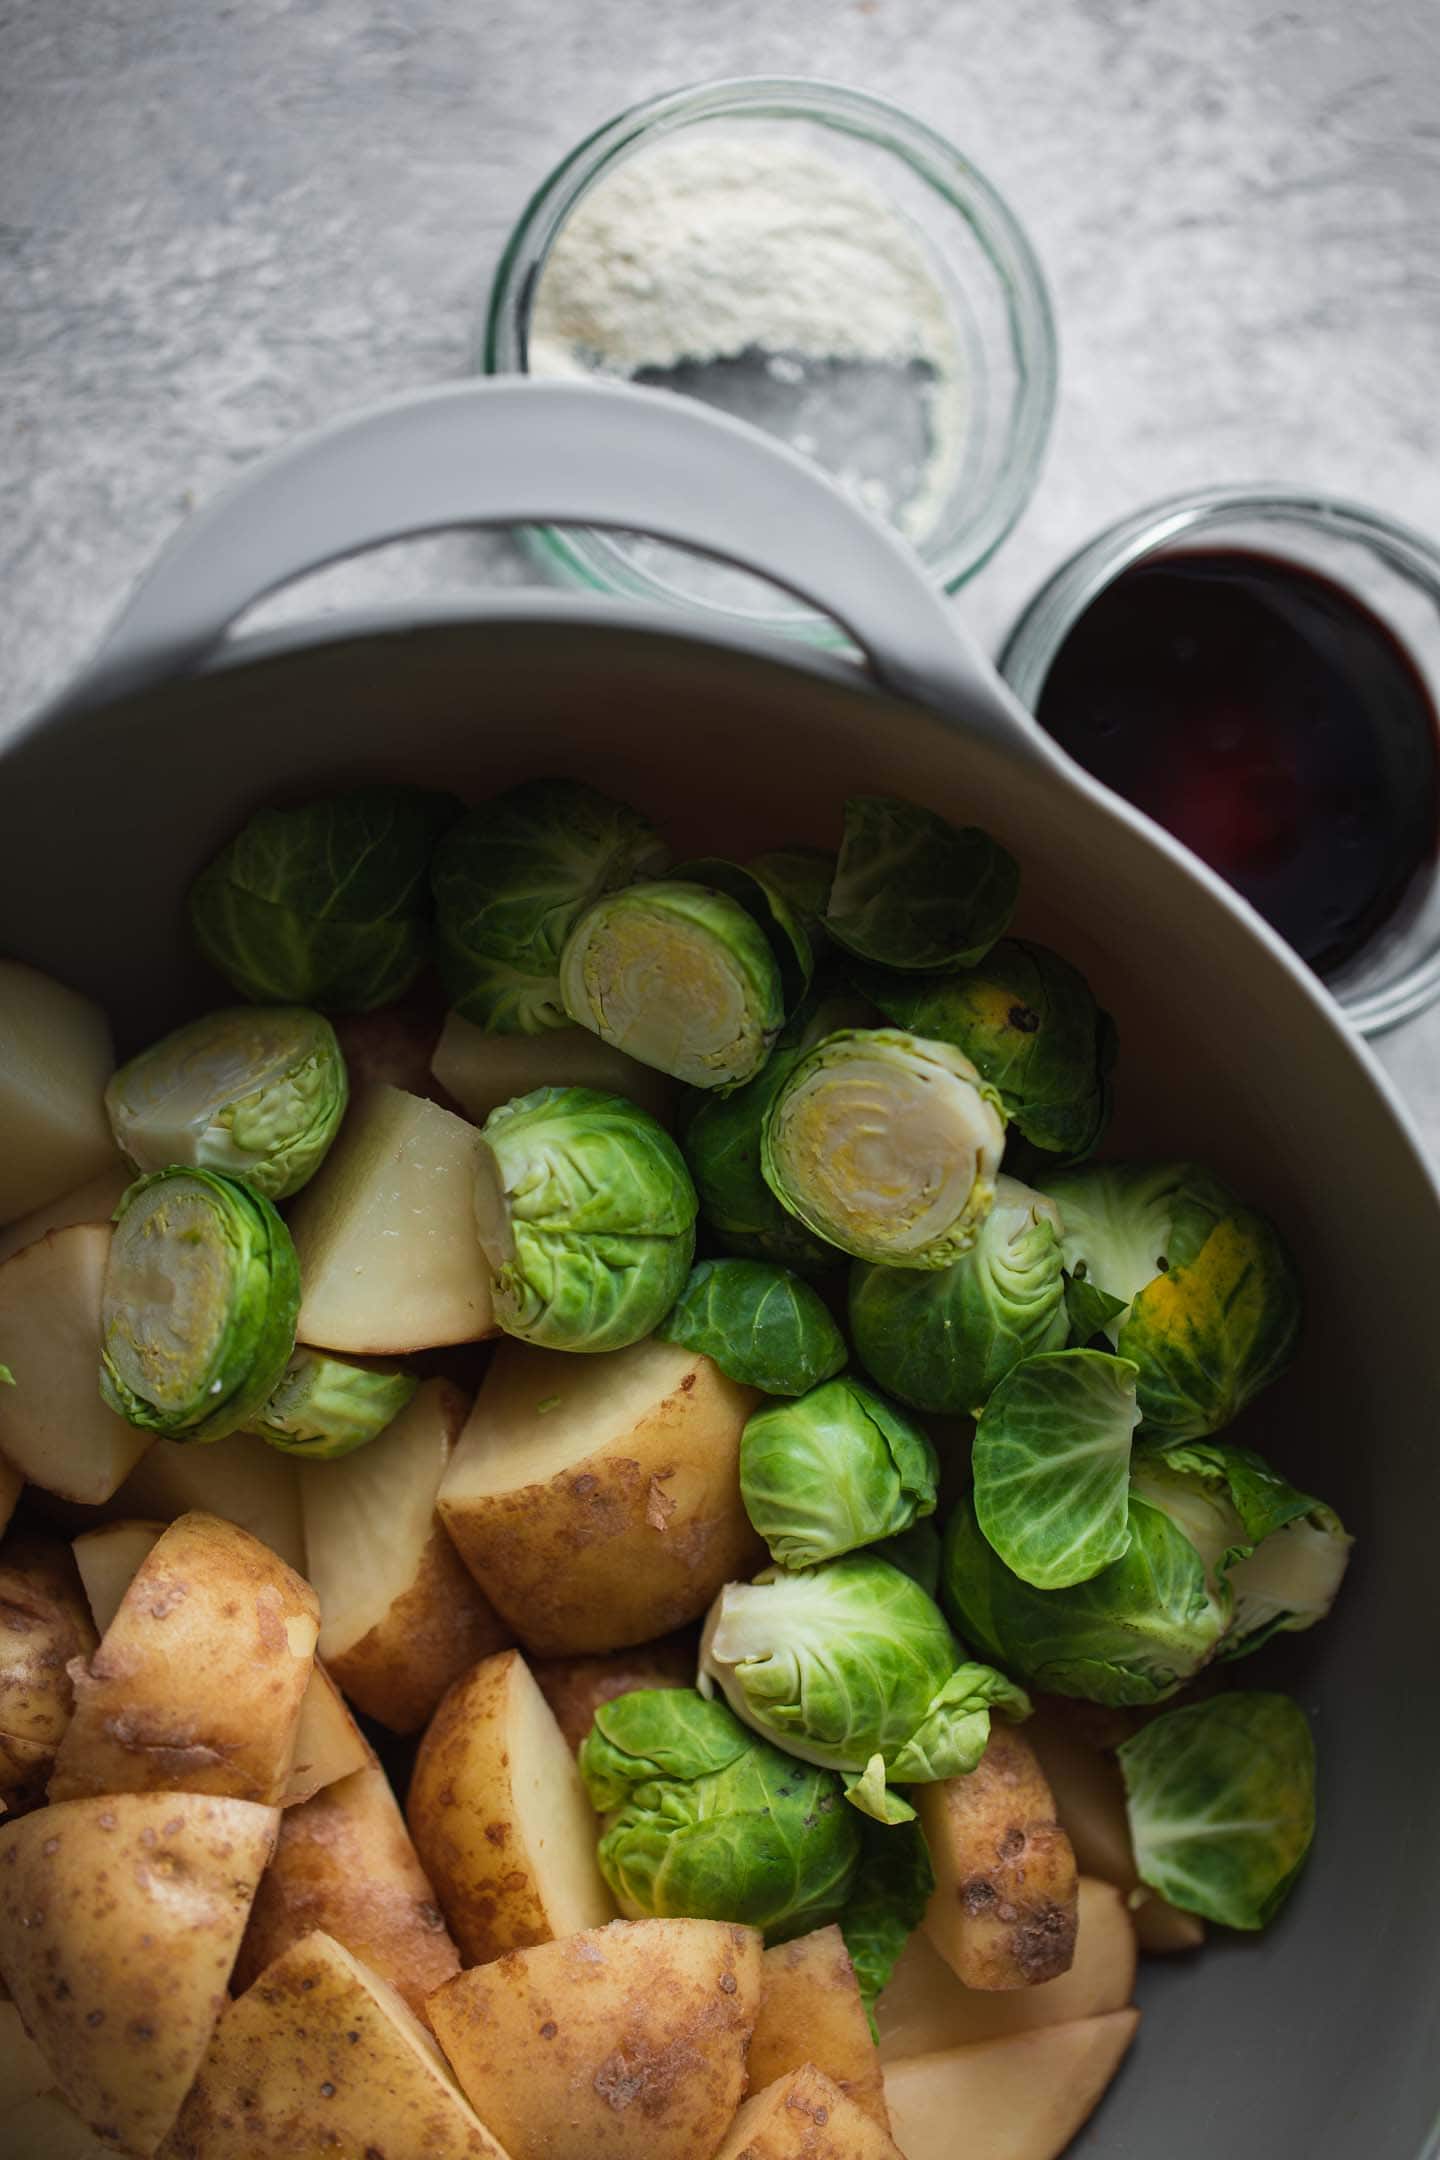 Brussels sprouts and potatoes in a mixing bowl